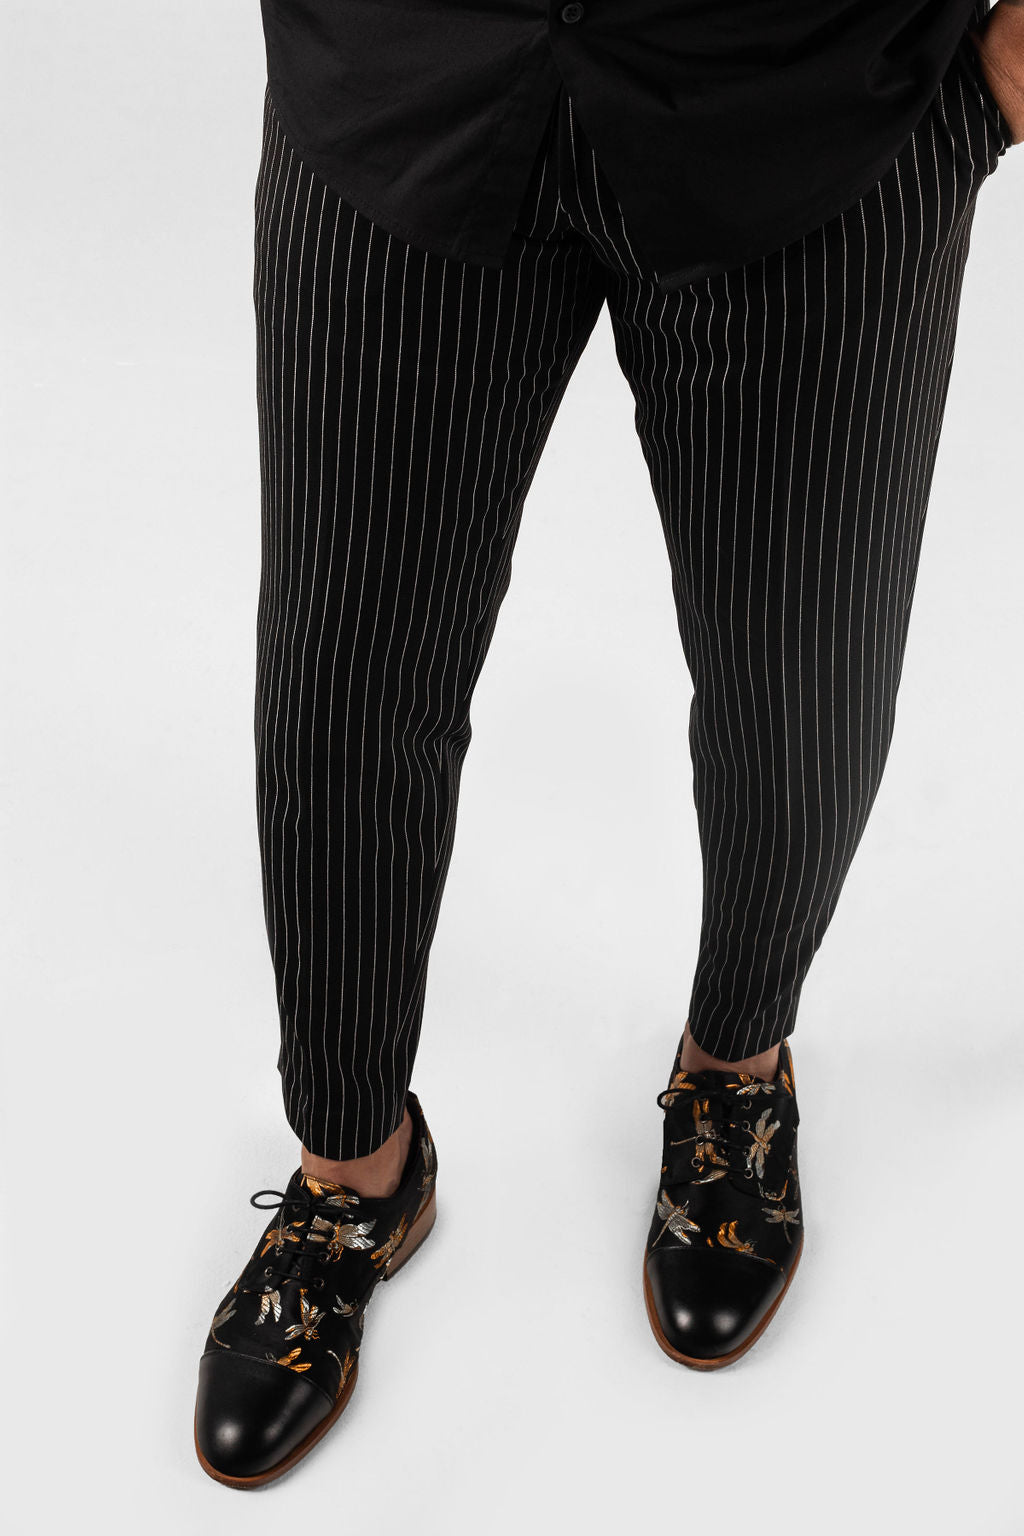 VICTORIAN STRIPED CARNY PANTS - BLACK/GOLD - Shrine of Hollywood